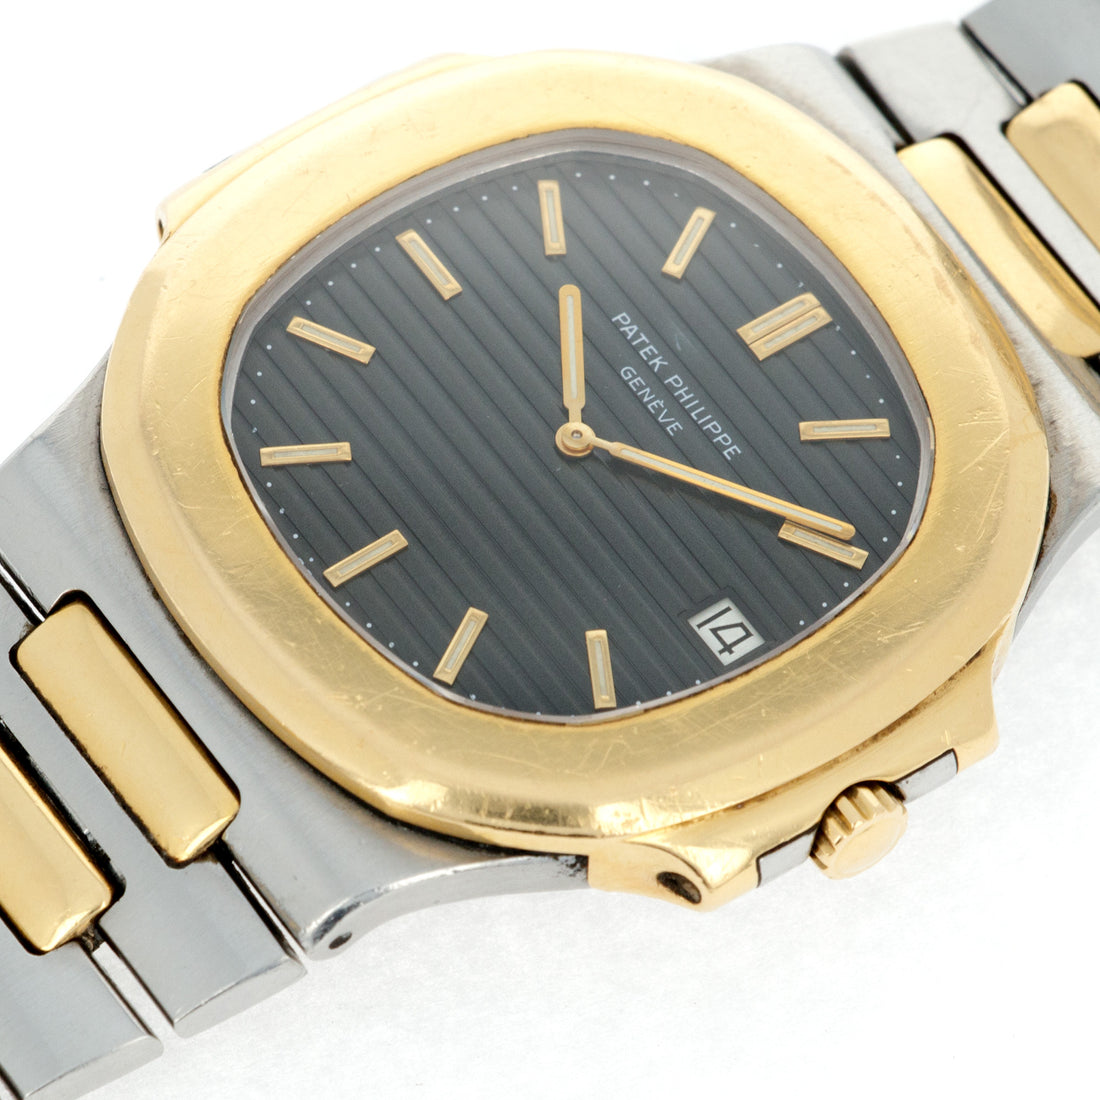 Patek Philippe Nautilus 3700 Two-Tone  Original Condition, Some Hairline Scratches Consistent with Age Unisex Two-Tone Black 40 mm Automatic 1970s Two-Tone Bracelet Handmade Travel Pouch 